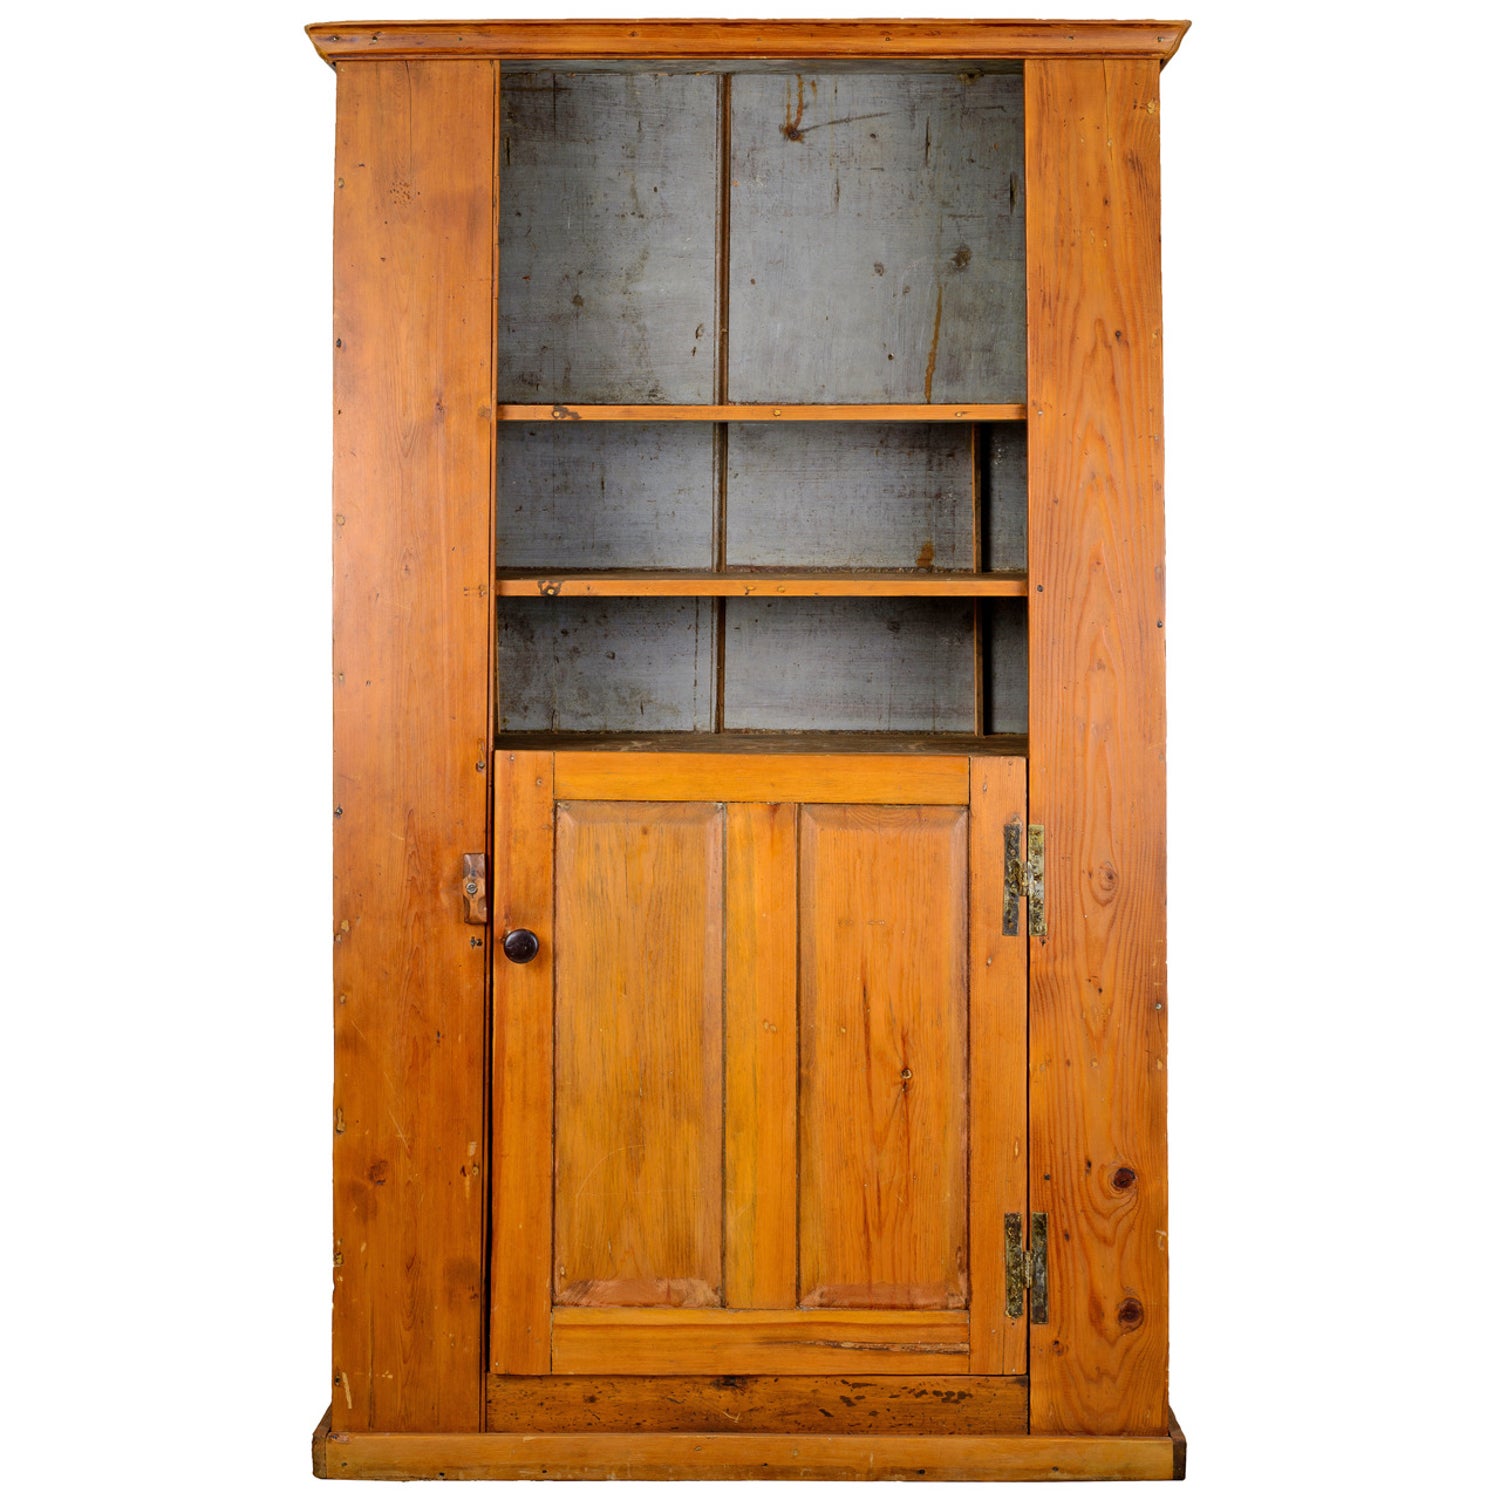 18th Century American Pine Slant Back Cupboard For Sale at 1stDibs